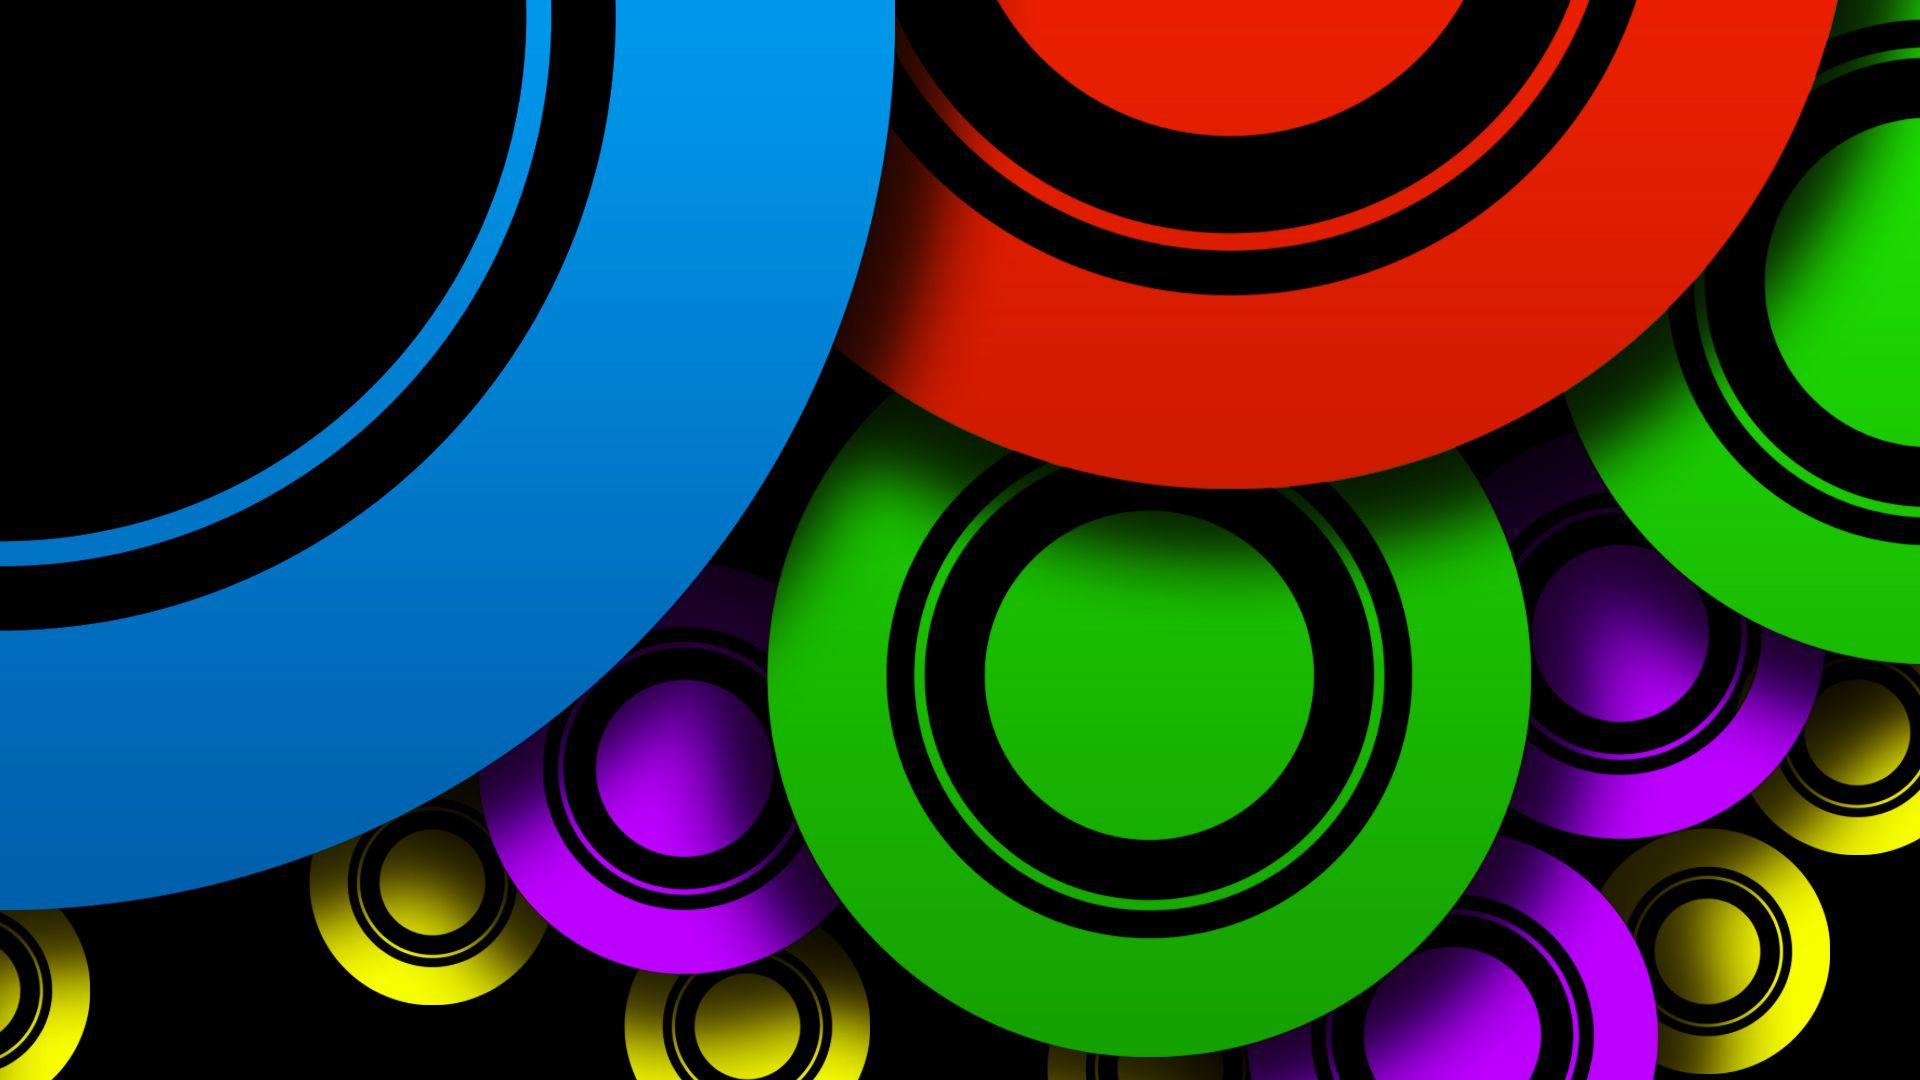 Abstract Circle Wallpapers Top Free Abstract Circle Backgrounds Wallpaperaccess 2591